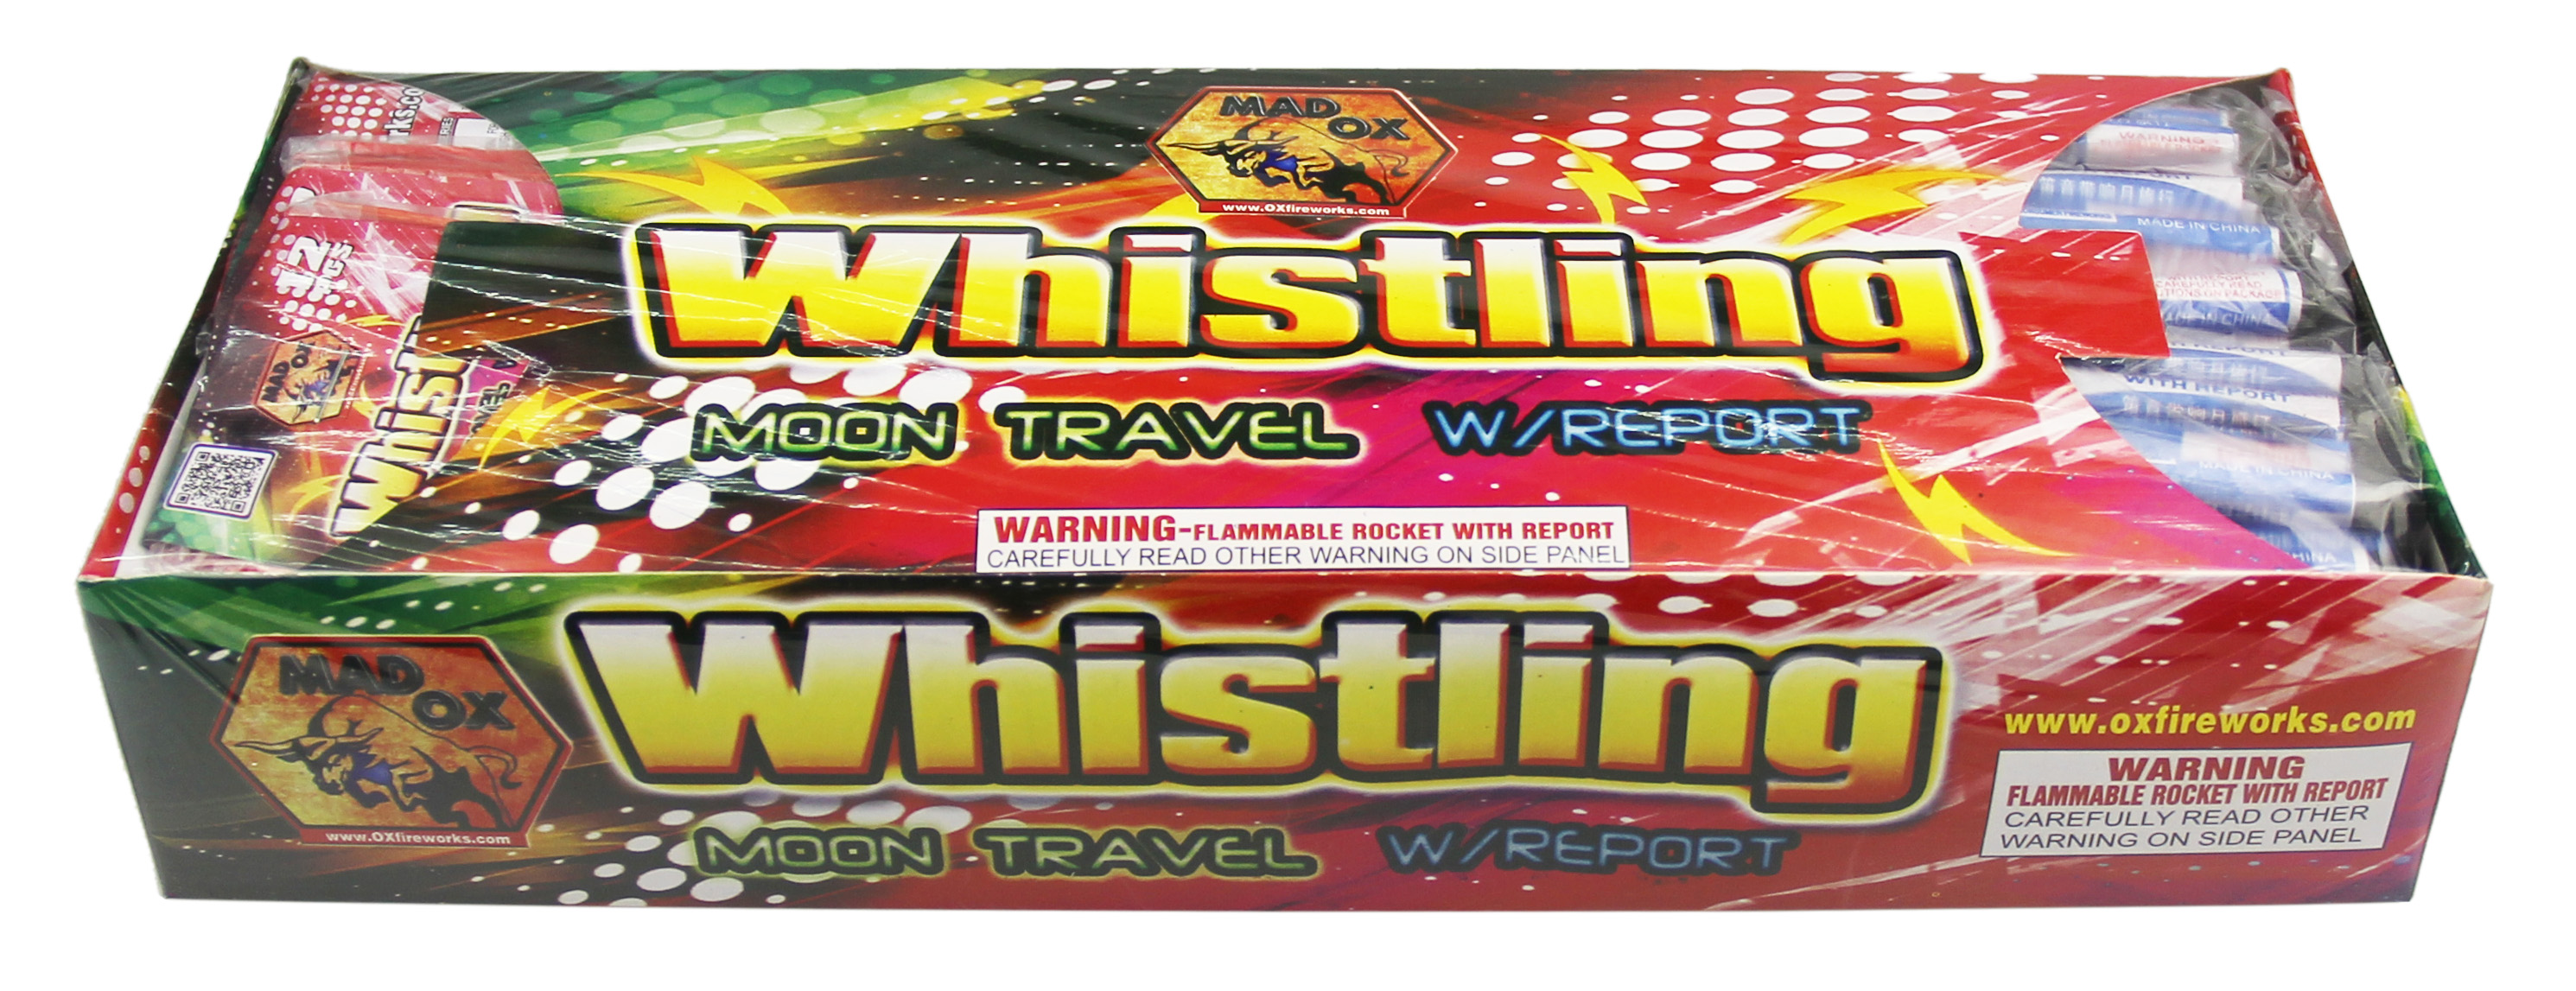 Whistling Moon Travel W/ Report